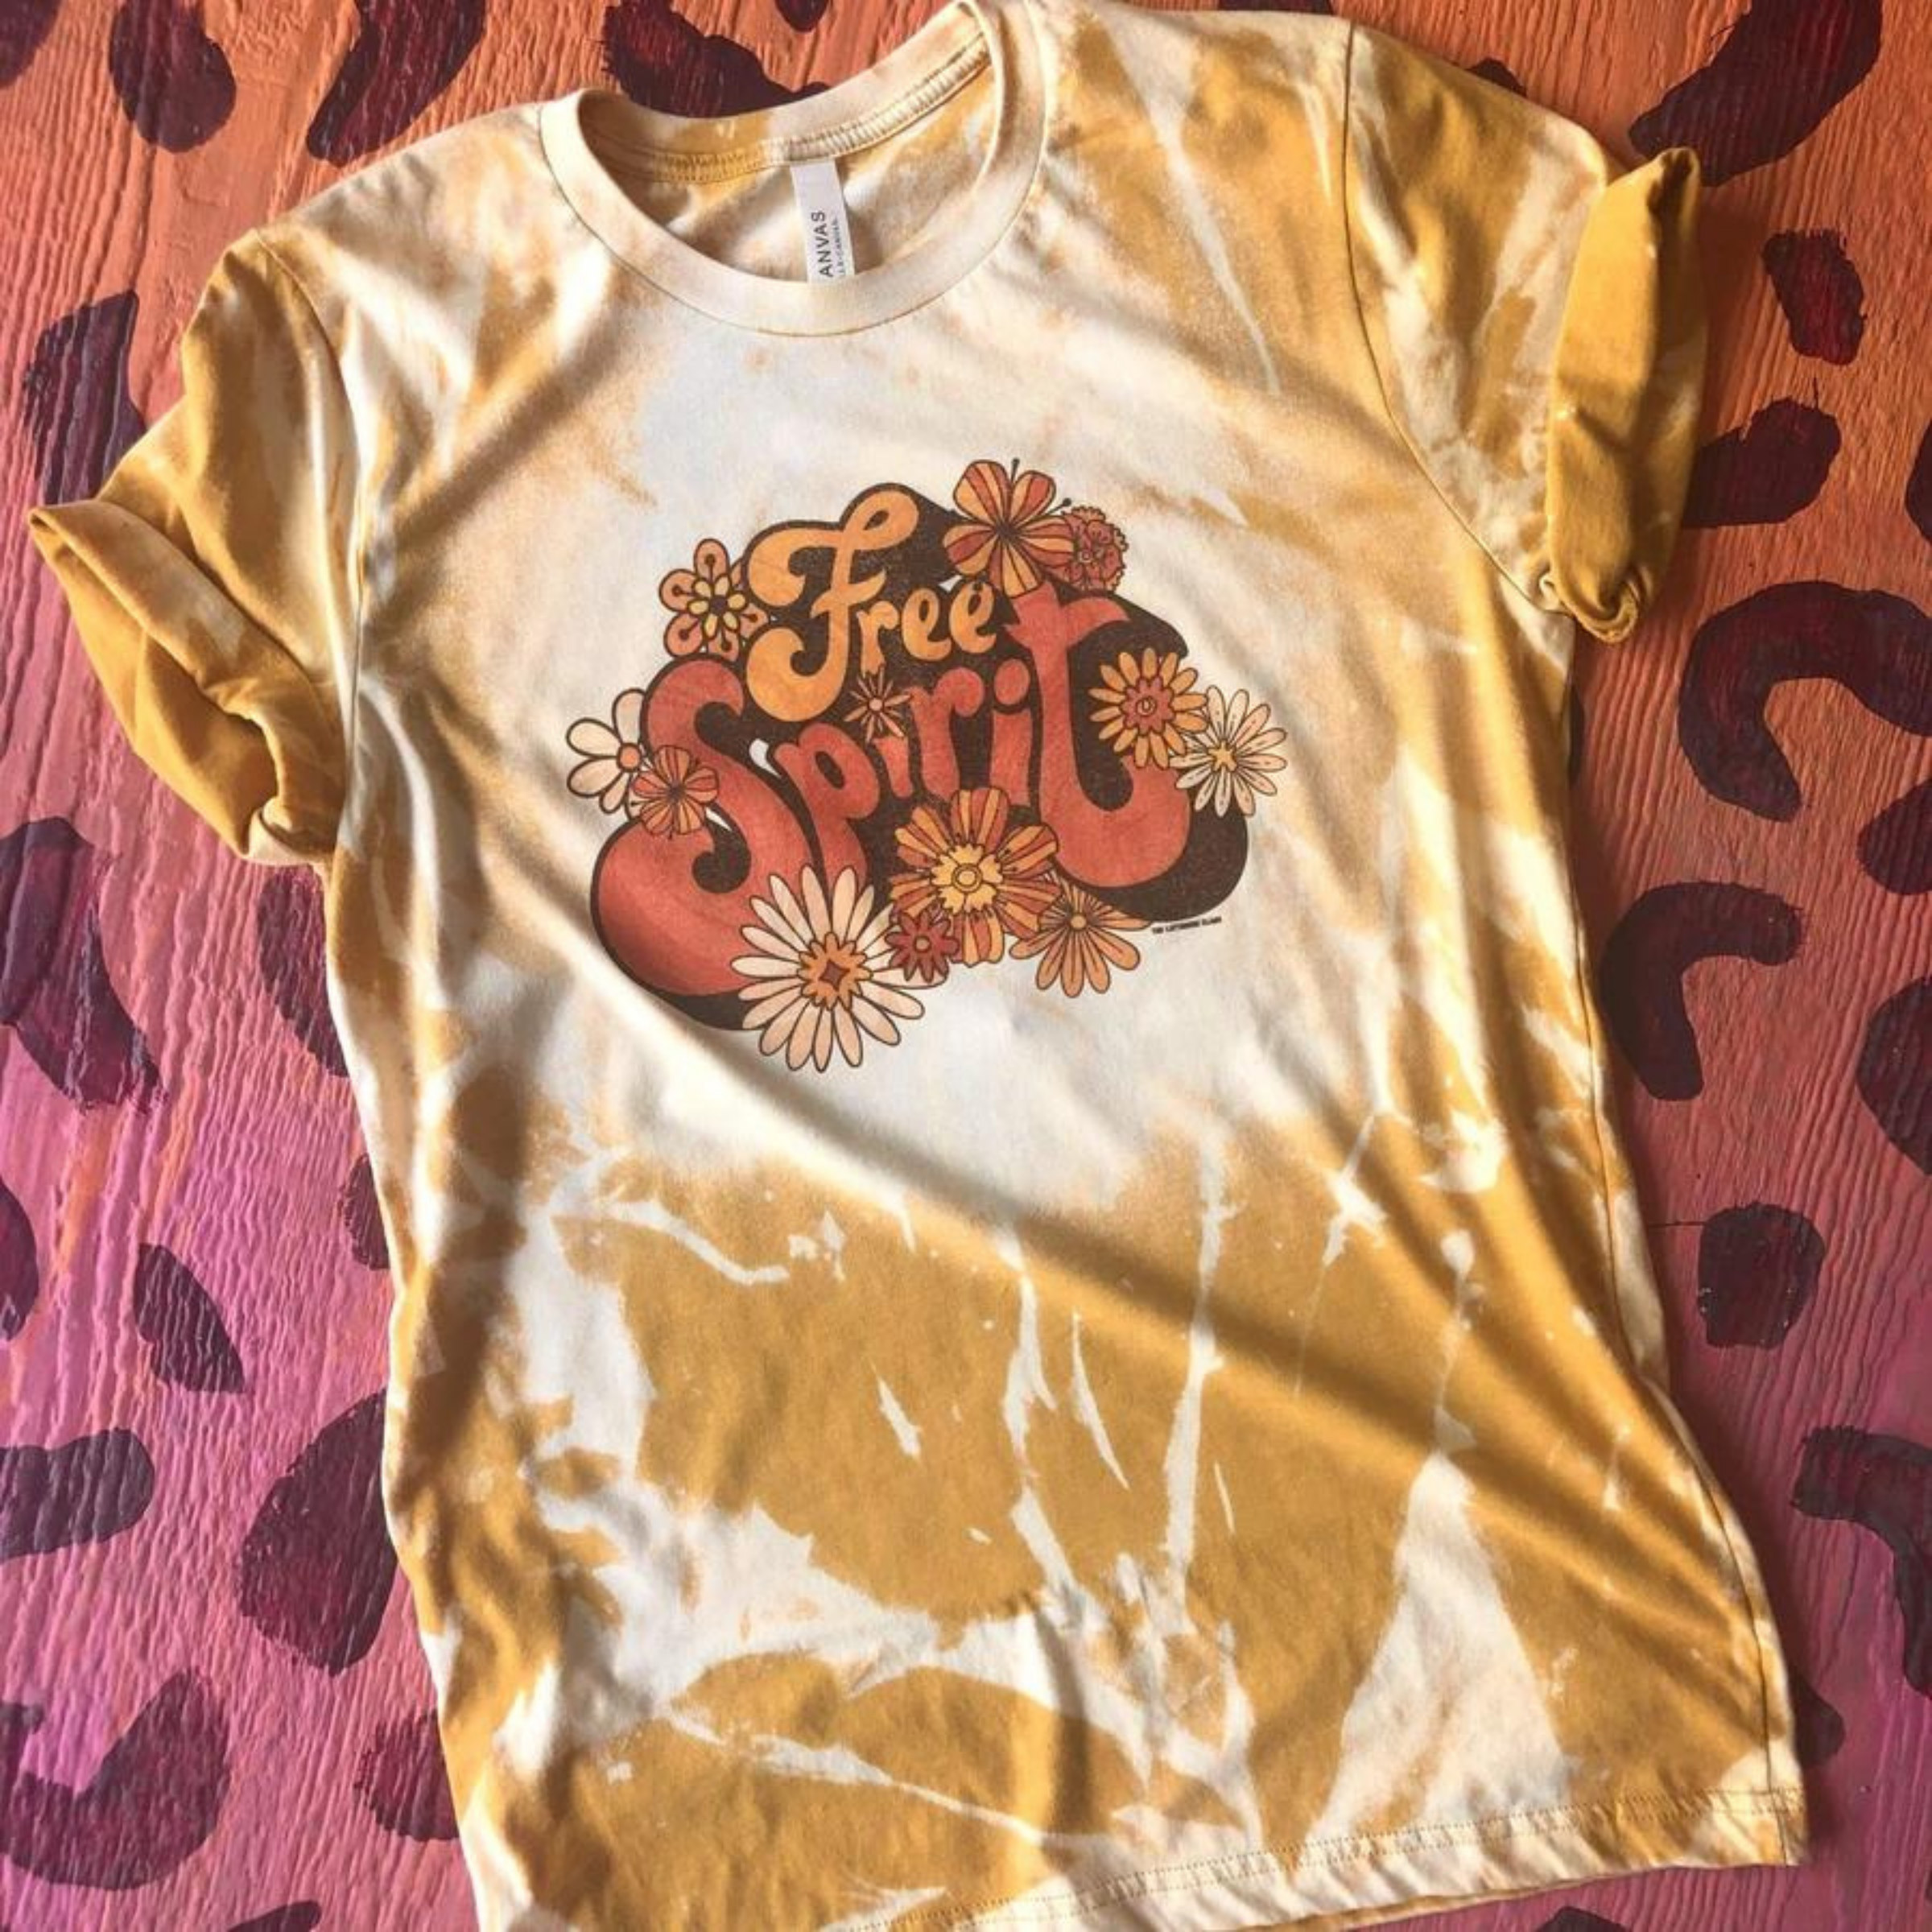 Yellow and white tie dye crew neck tee shirt that says "Free Spirit" in bubble letters and has flowers around it.